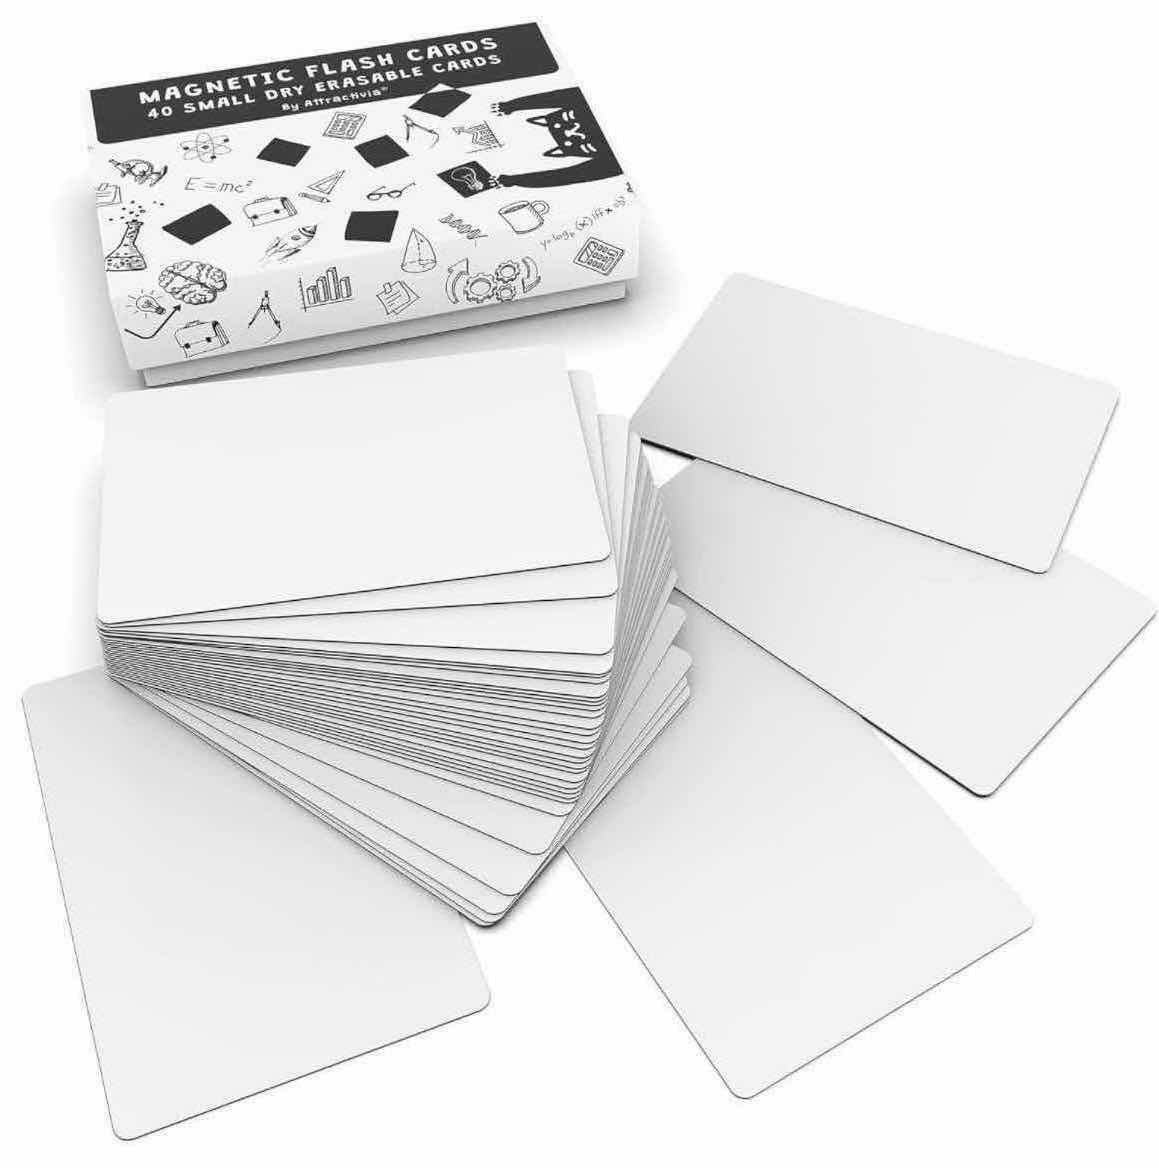 Photo 3 of NEW ATTRACTIVIA MAGNETIC FLASH CARDS, 40 CT SMALL DRY ERASABLE CARDS 2.8” X 1.8” (2 SETS)